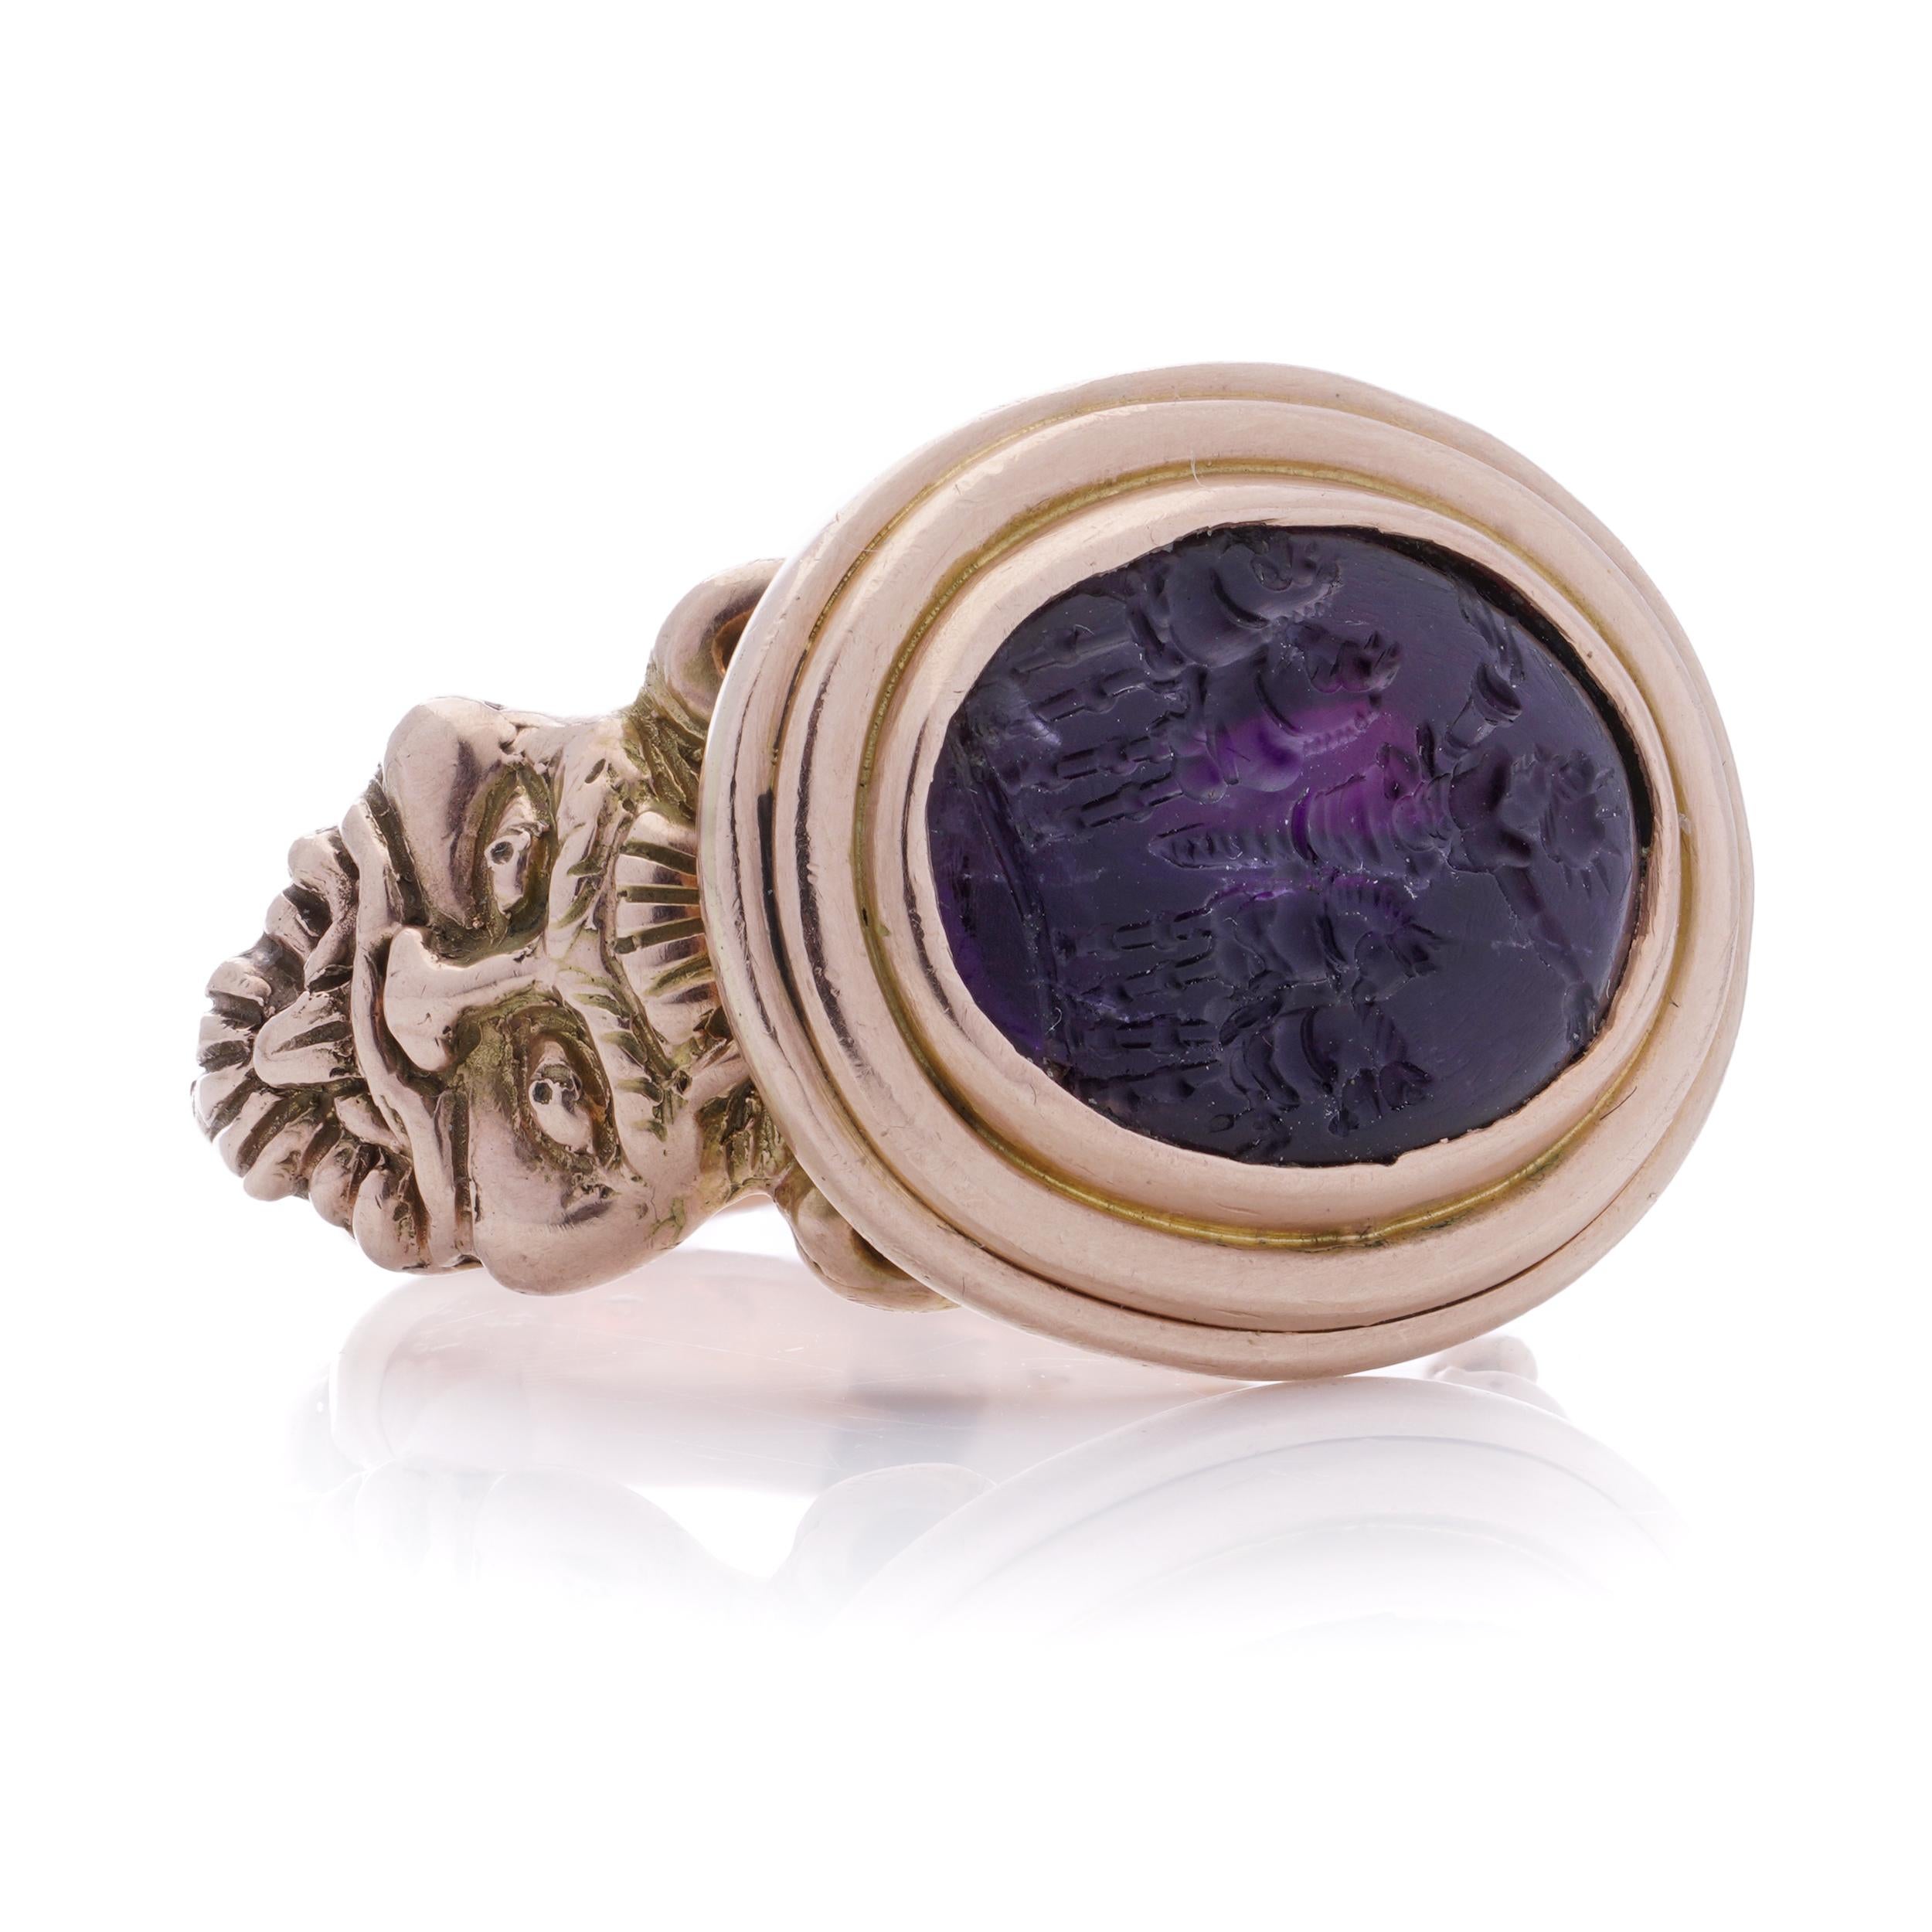 10kt. pink gold men's large-sized intaglio ring with amethyst featuring Helios  In Good Condition For Sale In Braintree, GB